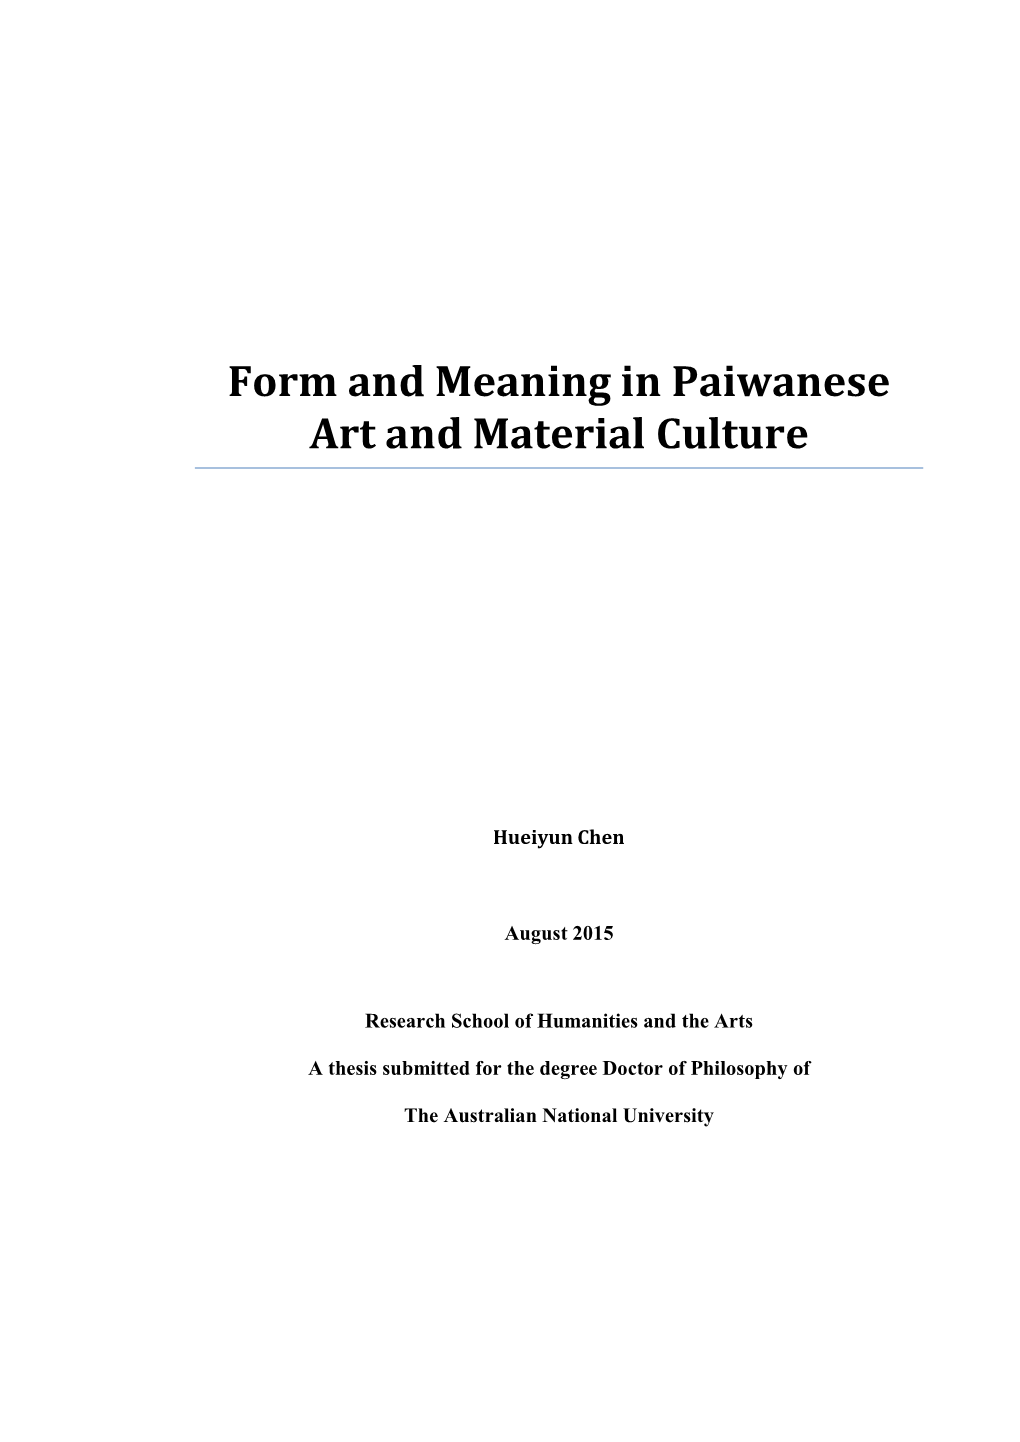 Form and Meaning in Paiwanese Art and Material Culture